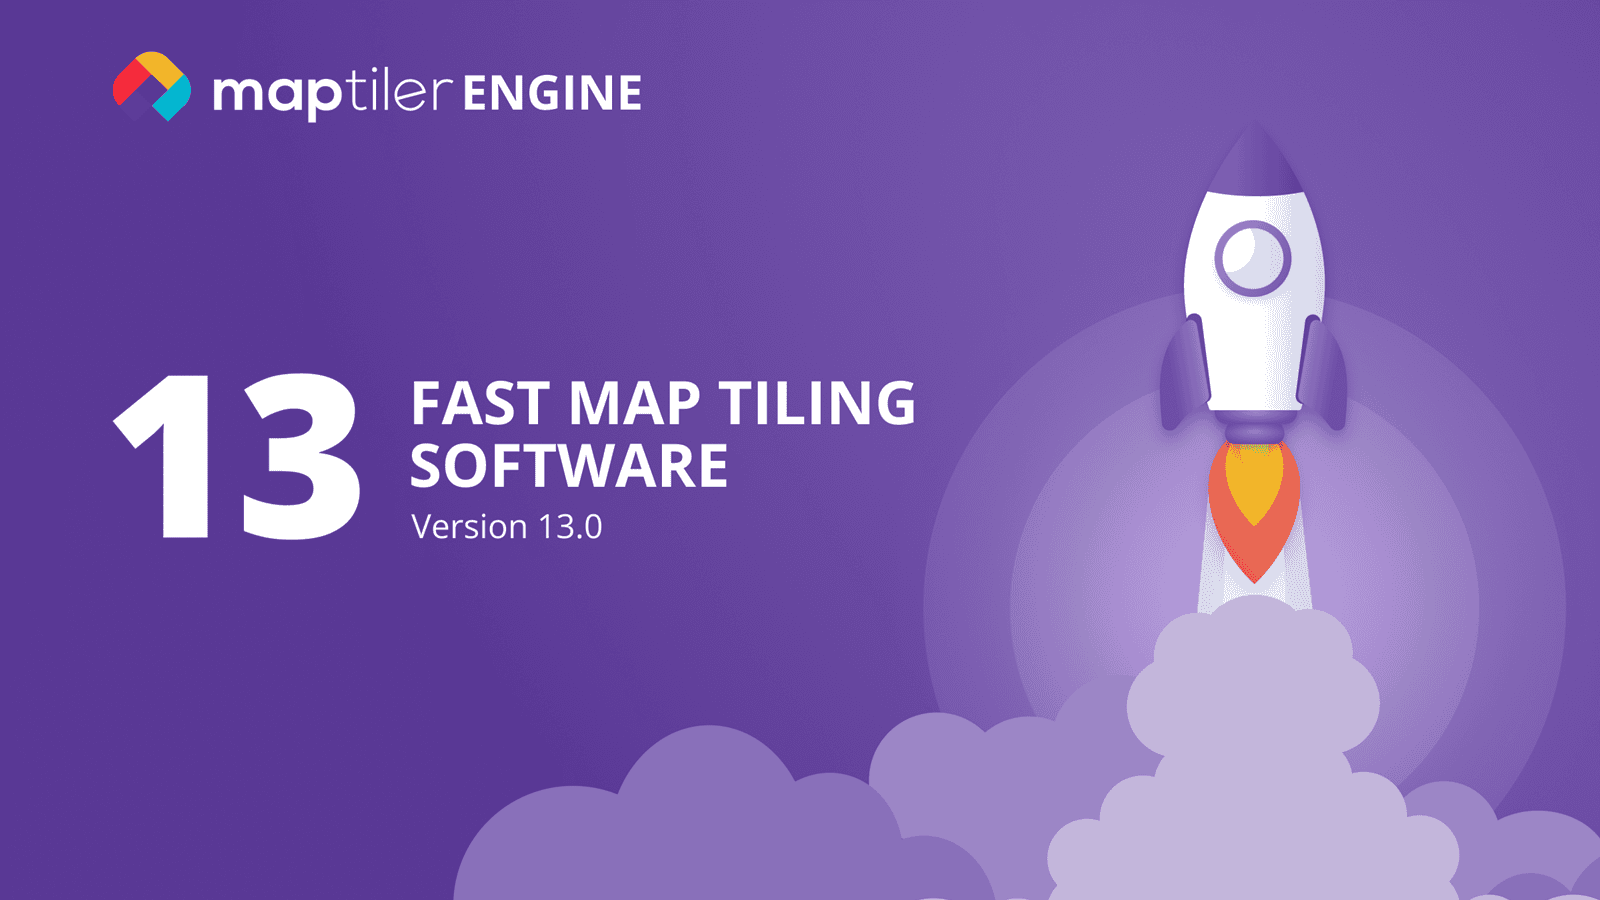  faster map tiling with the new MapTiler Engine 13